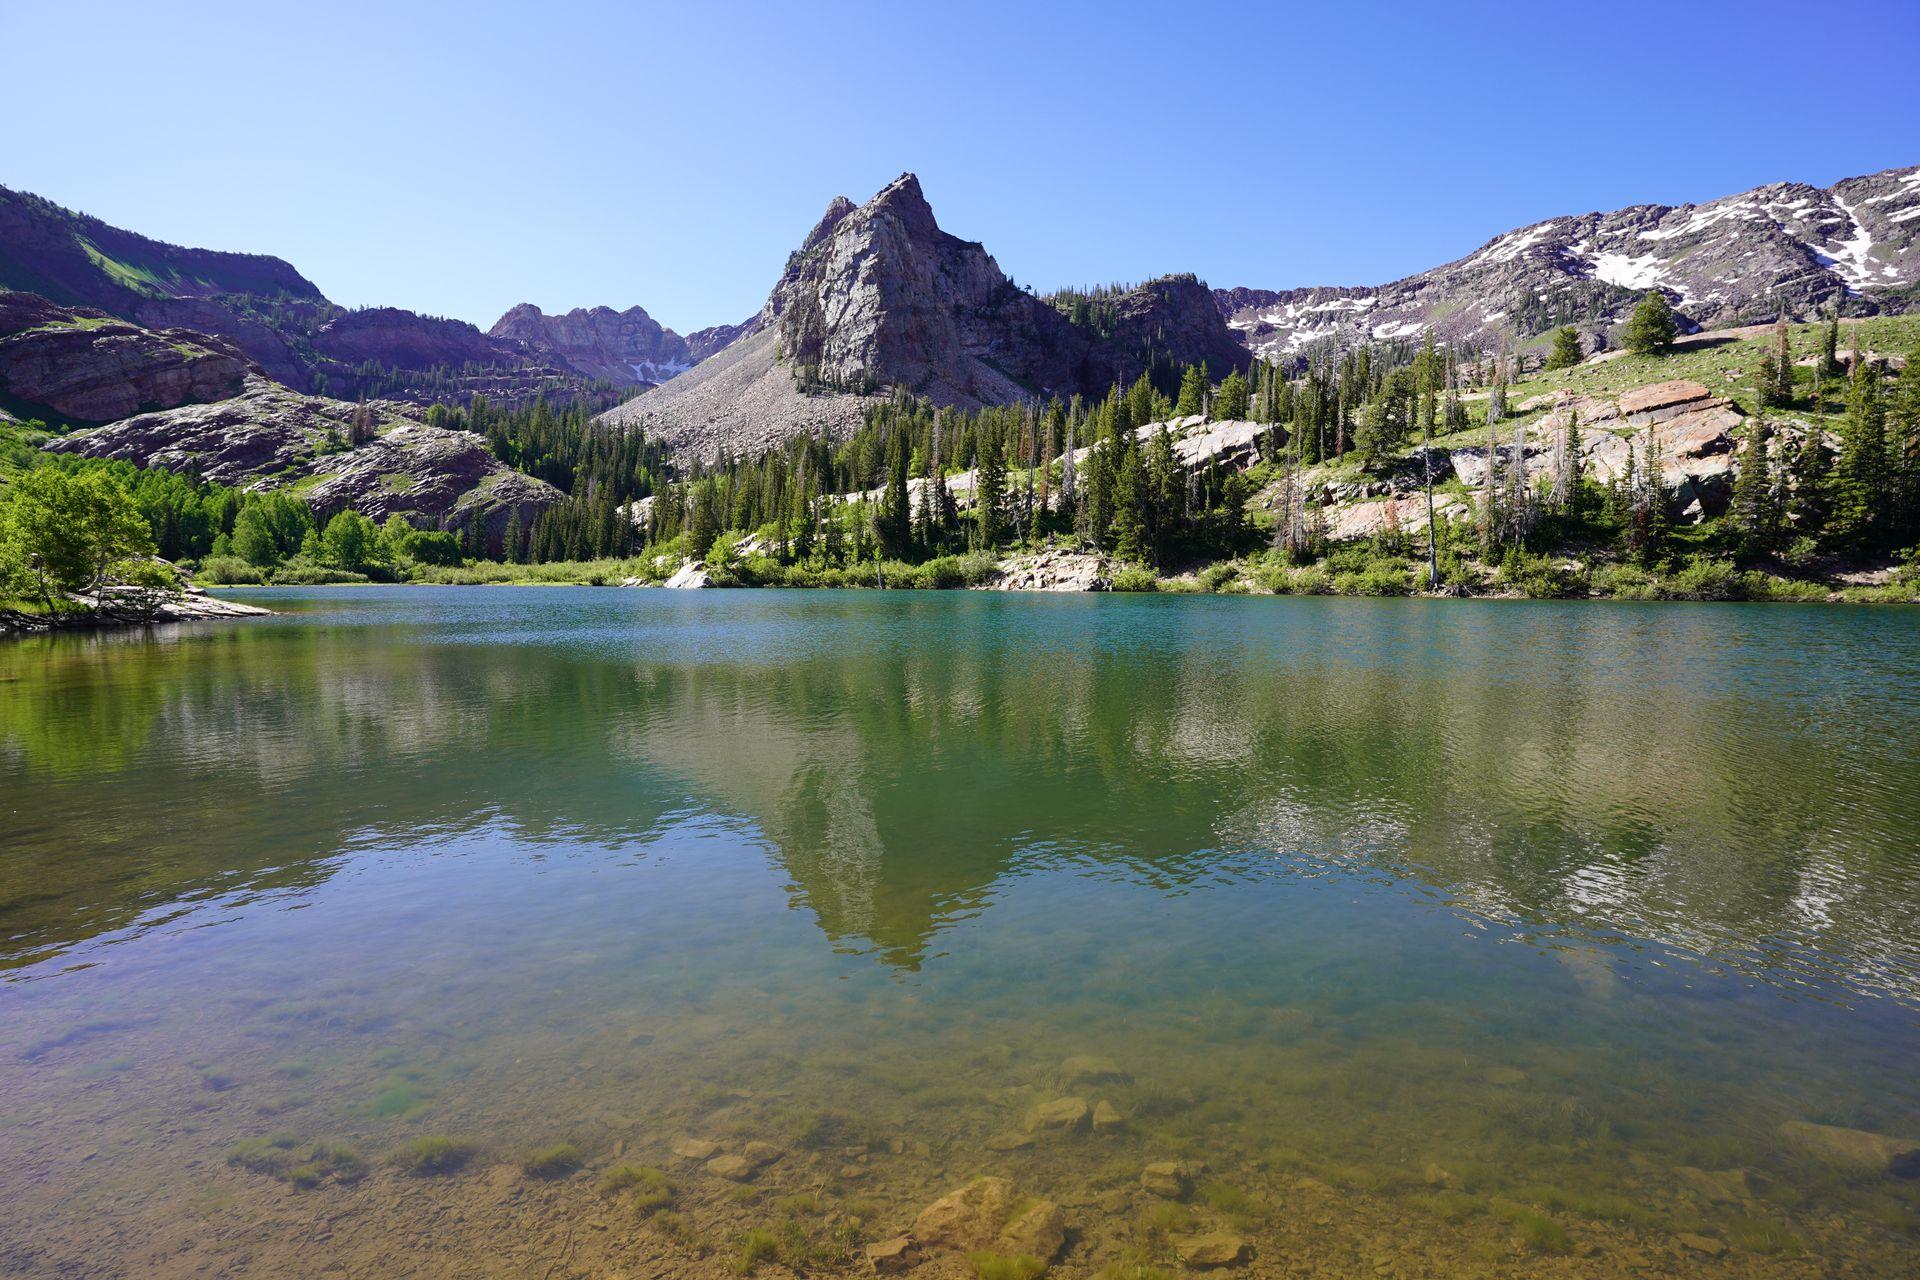 A view of Lake Blanche. There is a reflection of a pointed mountain in the water.